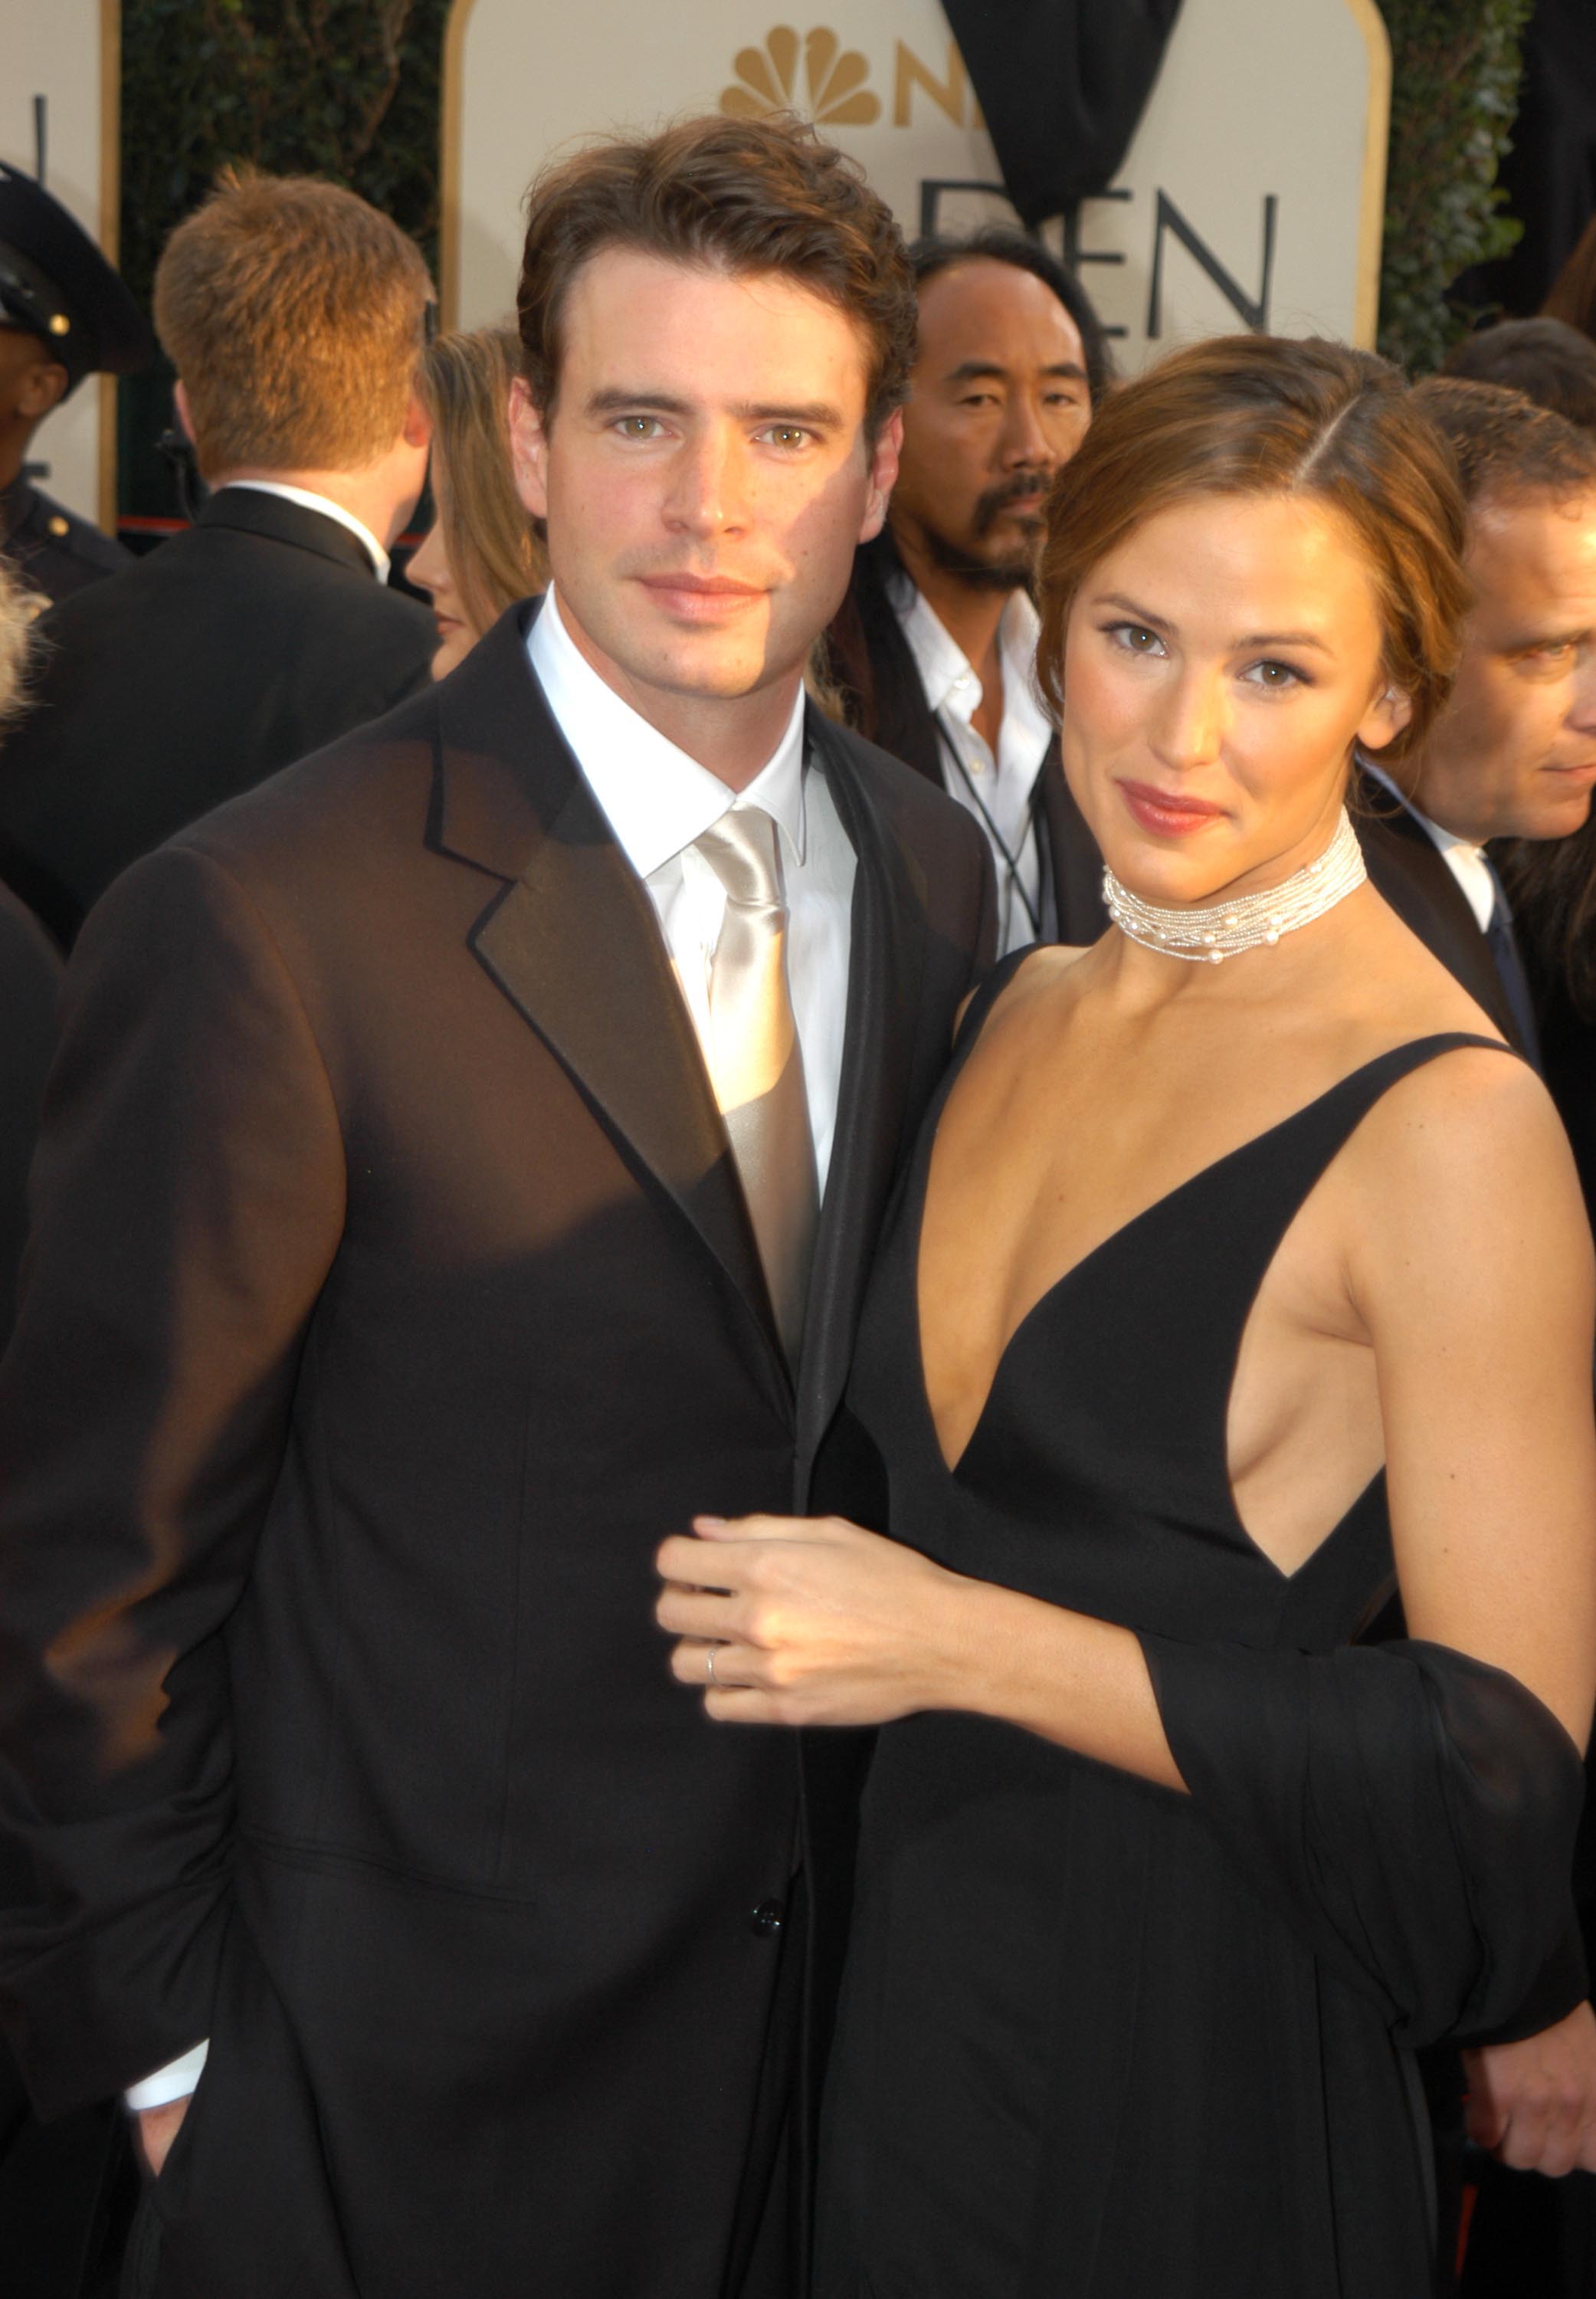 Jennifer Garner and Scott Foley at the 60th Annual Golden Globe Awards on January 19, 2003 | Source: Getty Images